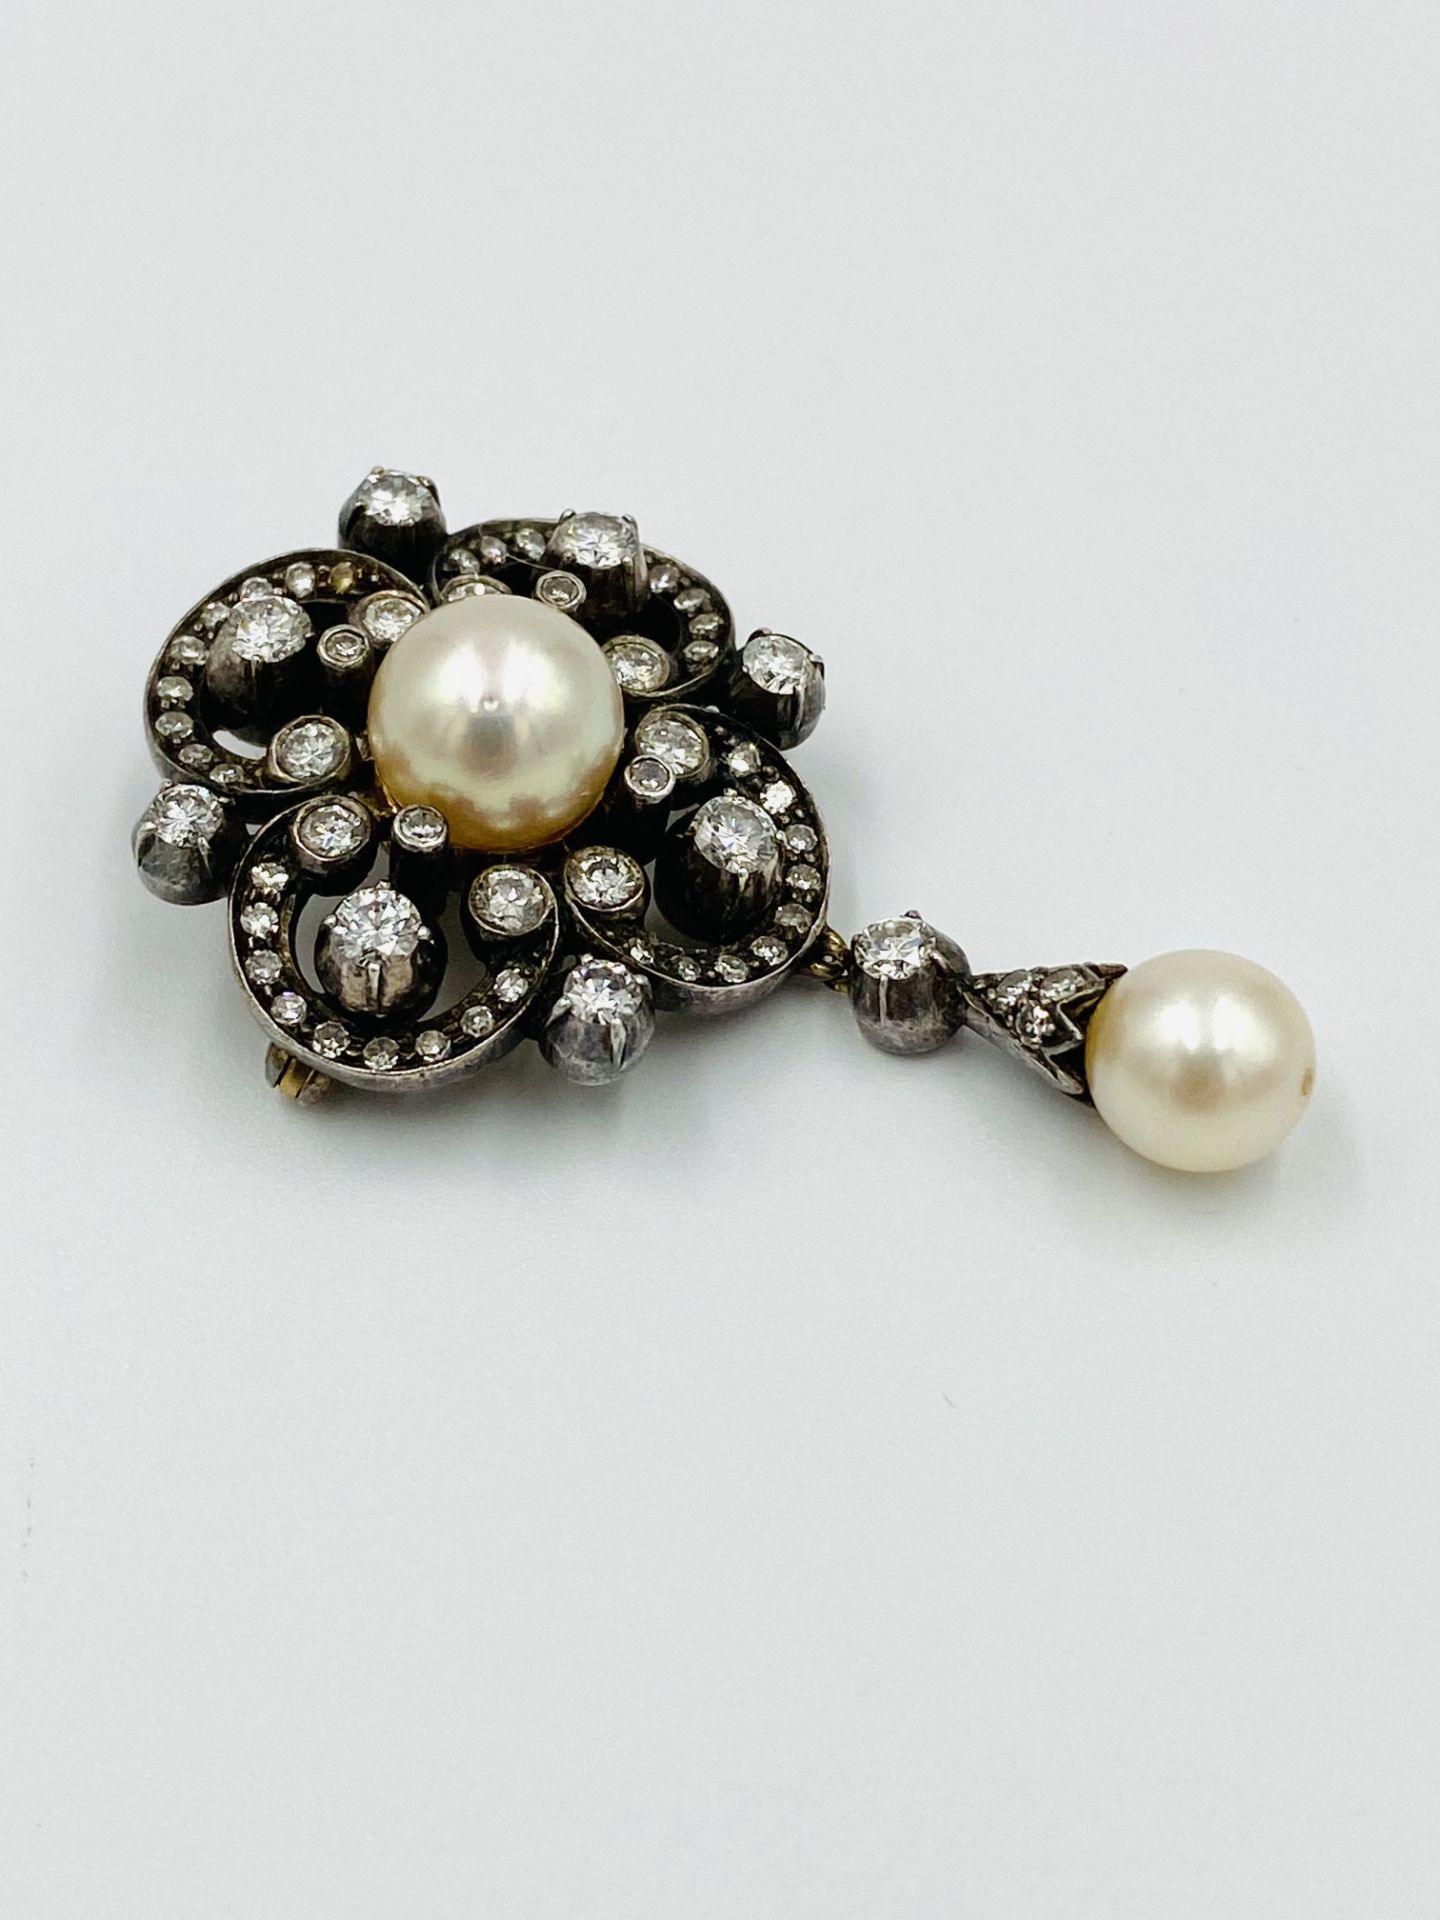 Pearl and diamond drop brooch - Image 2 of 4